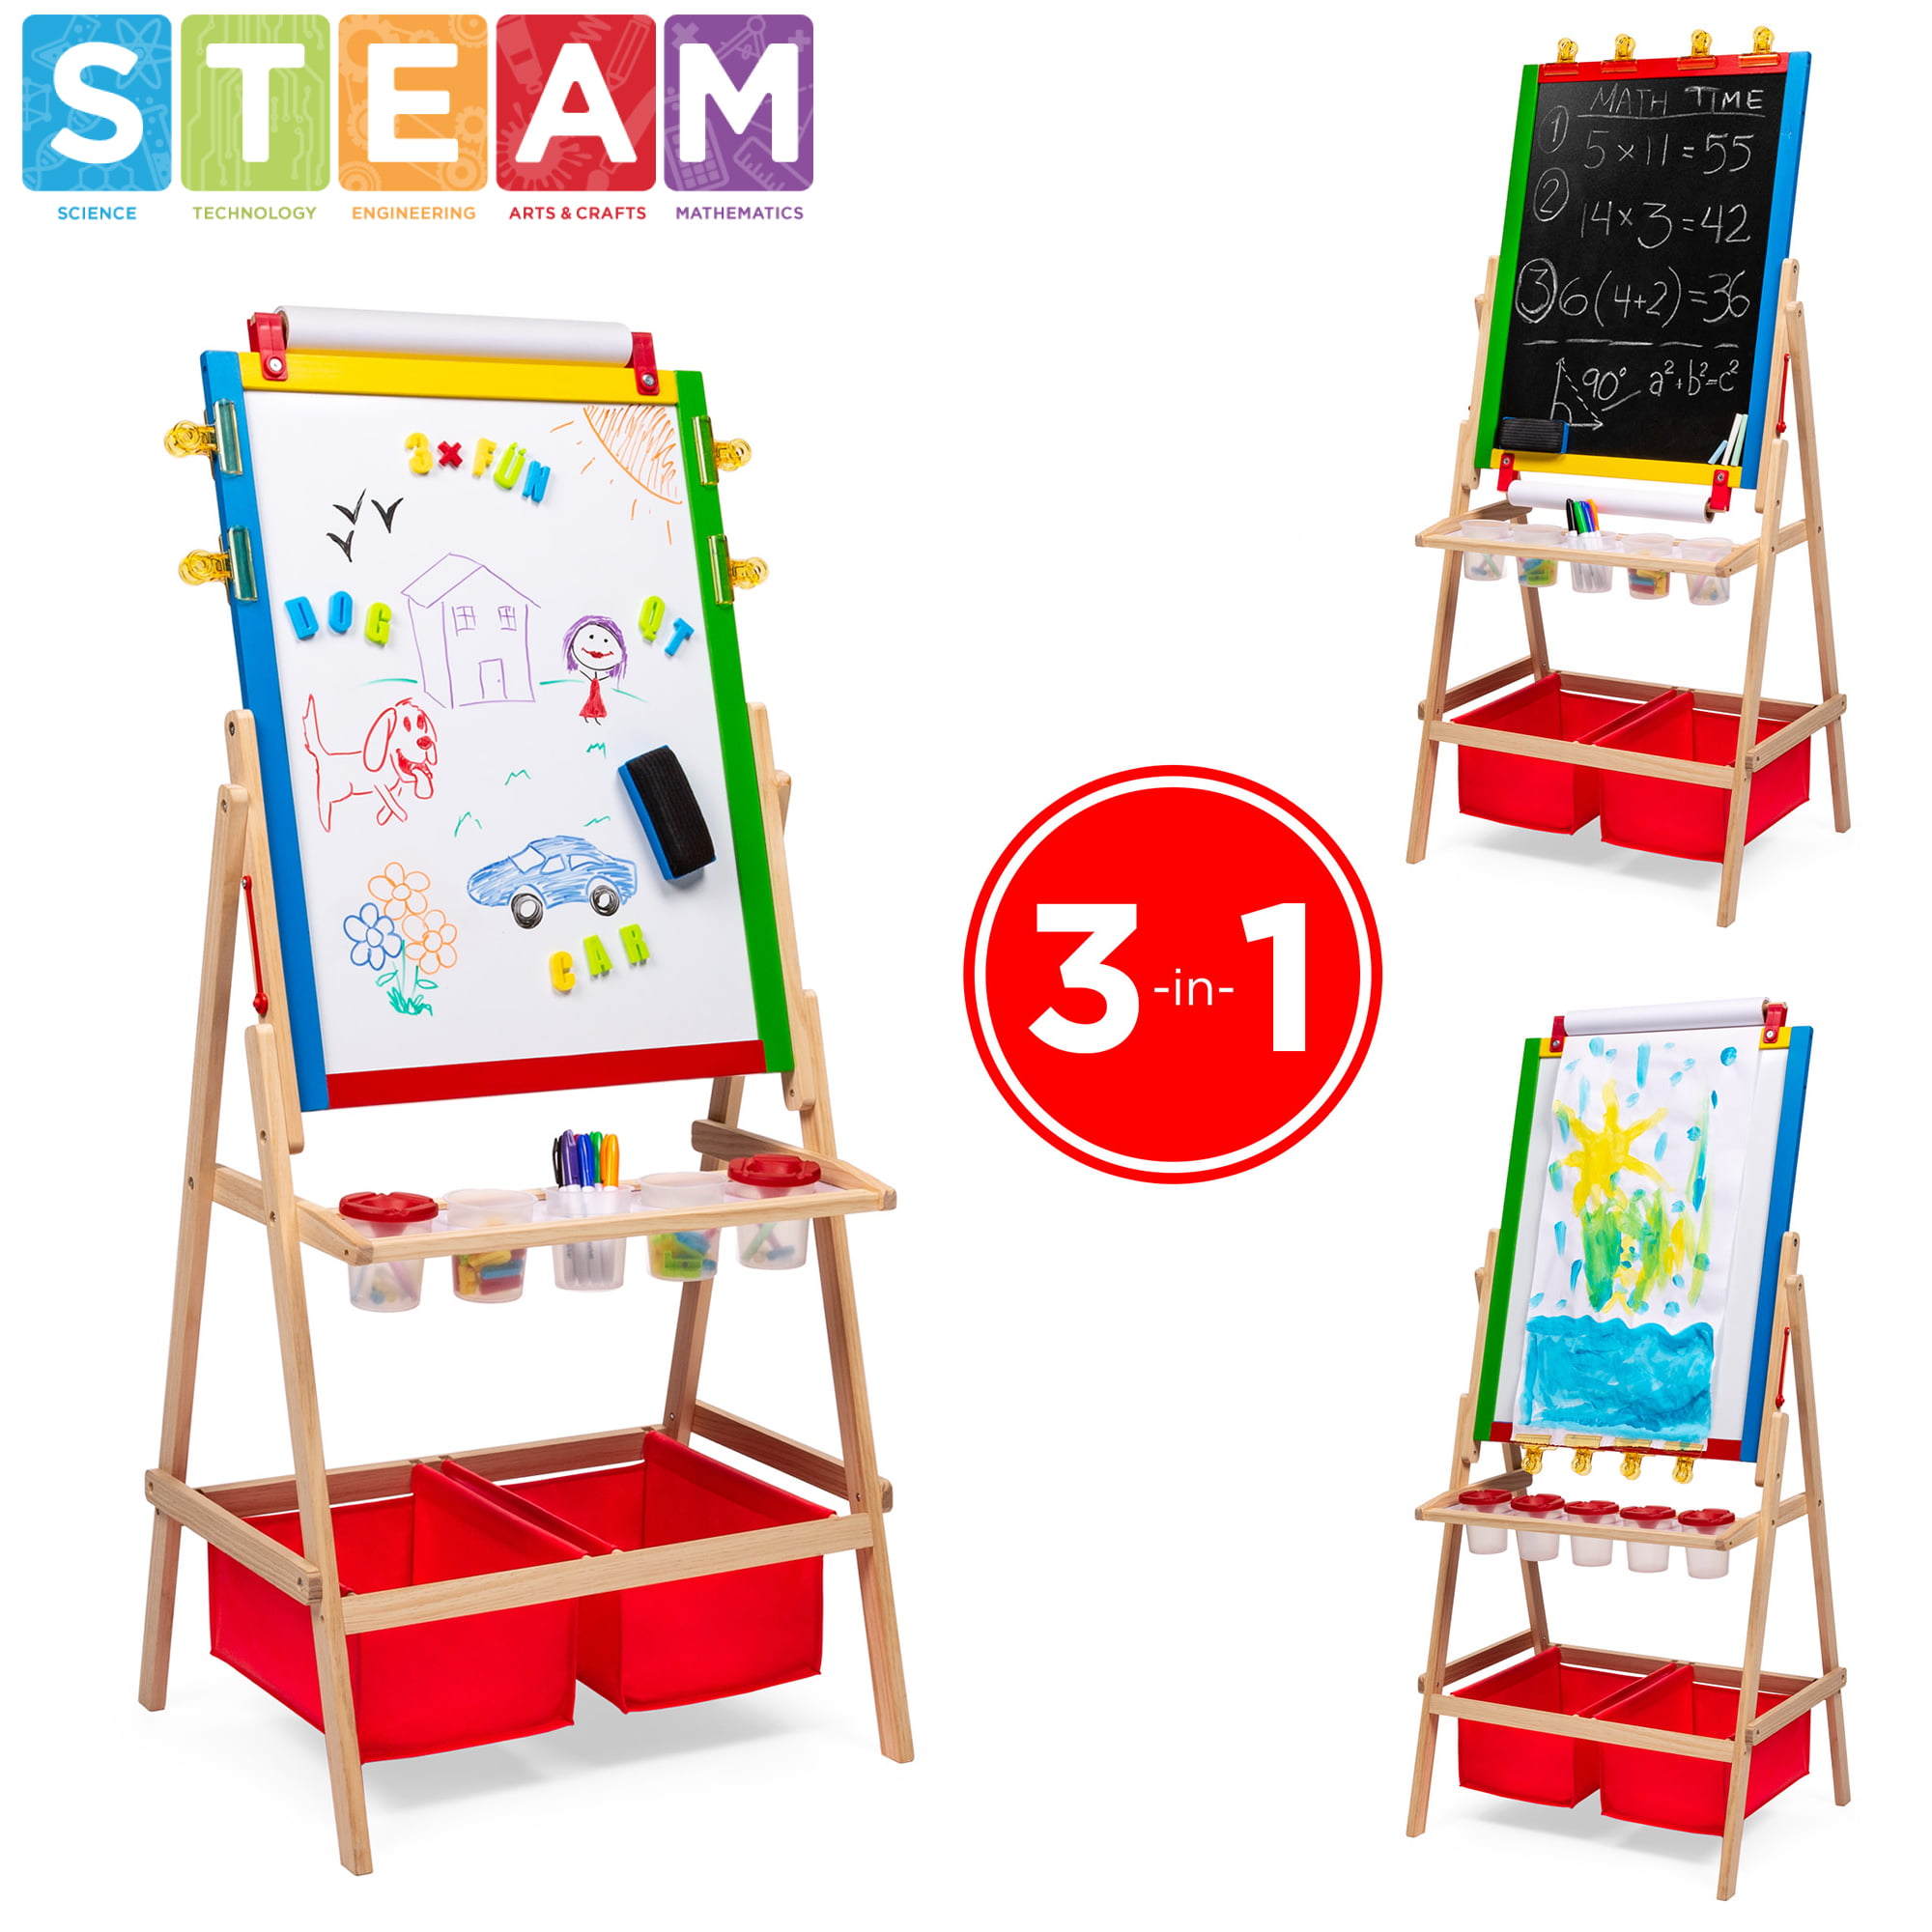 3 in 1 Kids Easel Double-Sided Whiteboard & Chalkboard Drawing Board with Drawing Axis & Paper Roll Numbers Easel for Kids Paint Cups for Toddlers and Kids Green